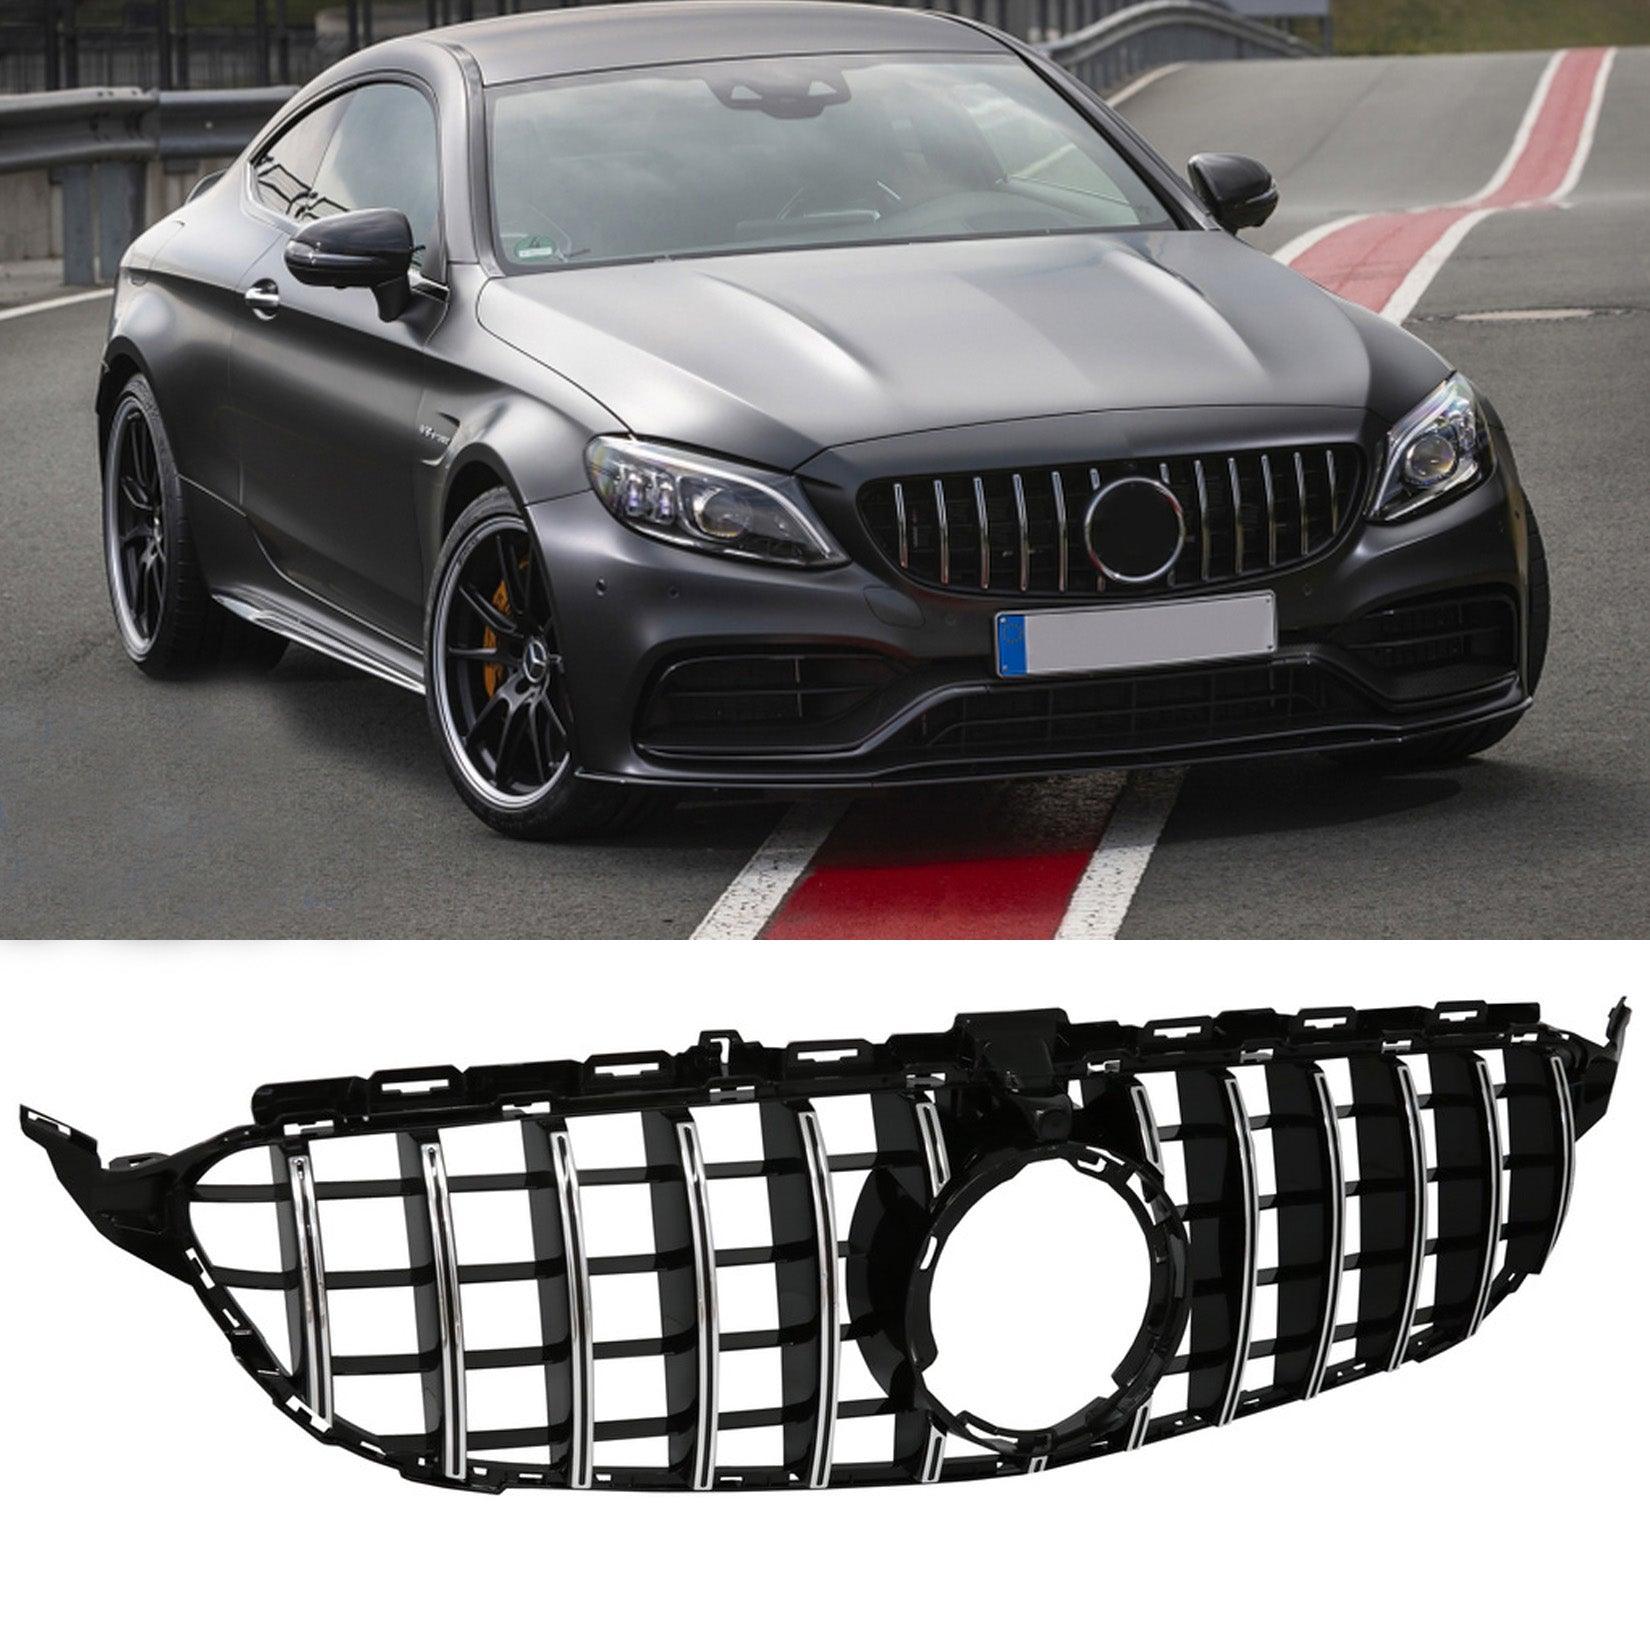 Mercedes C-Class W205 Facelift 2018-2020 Front Grill